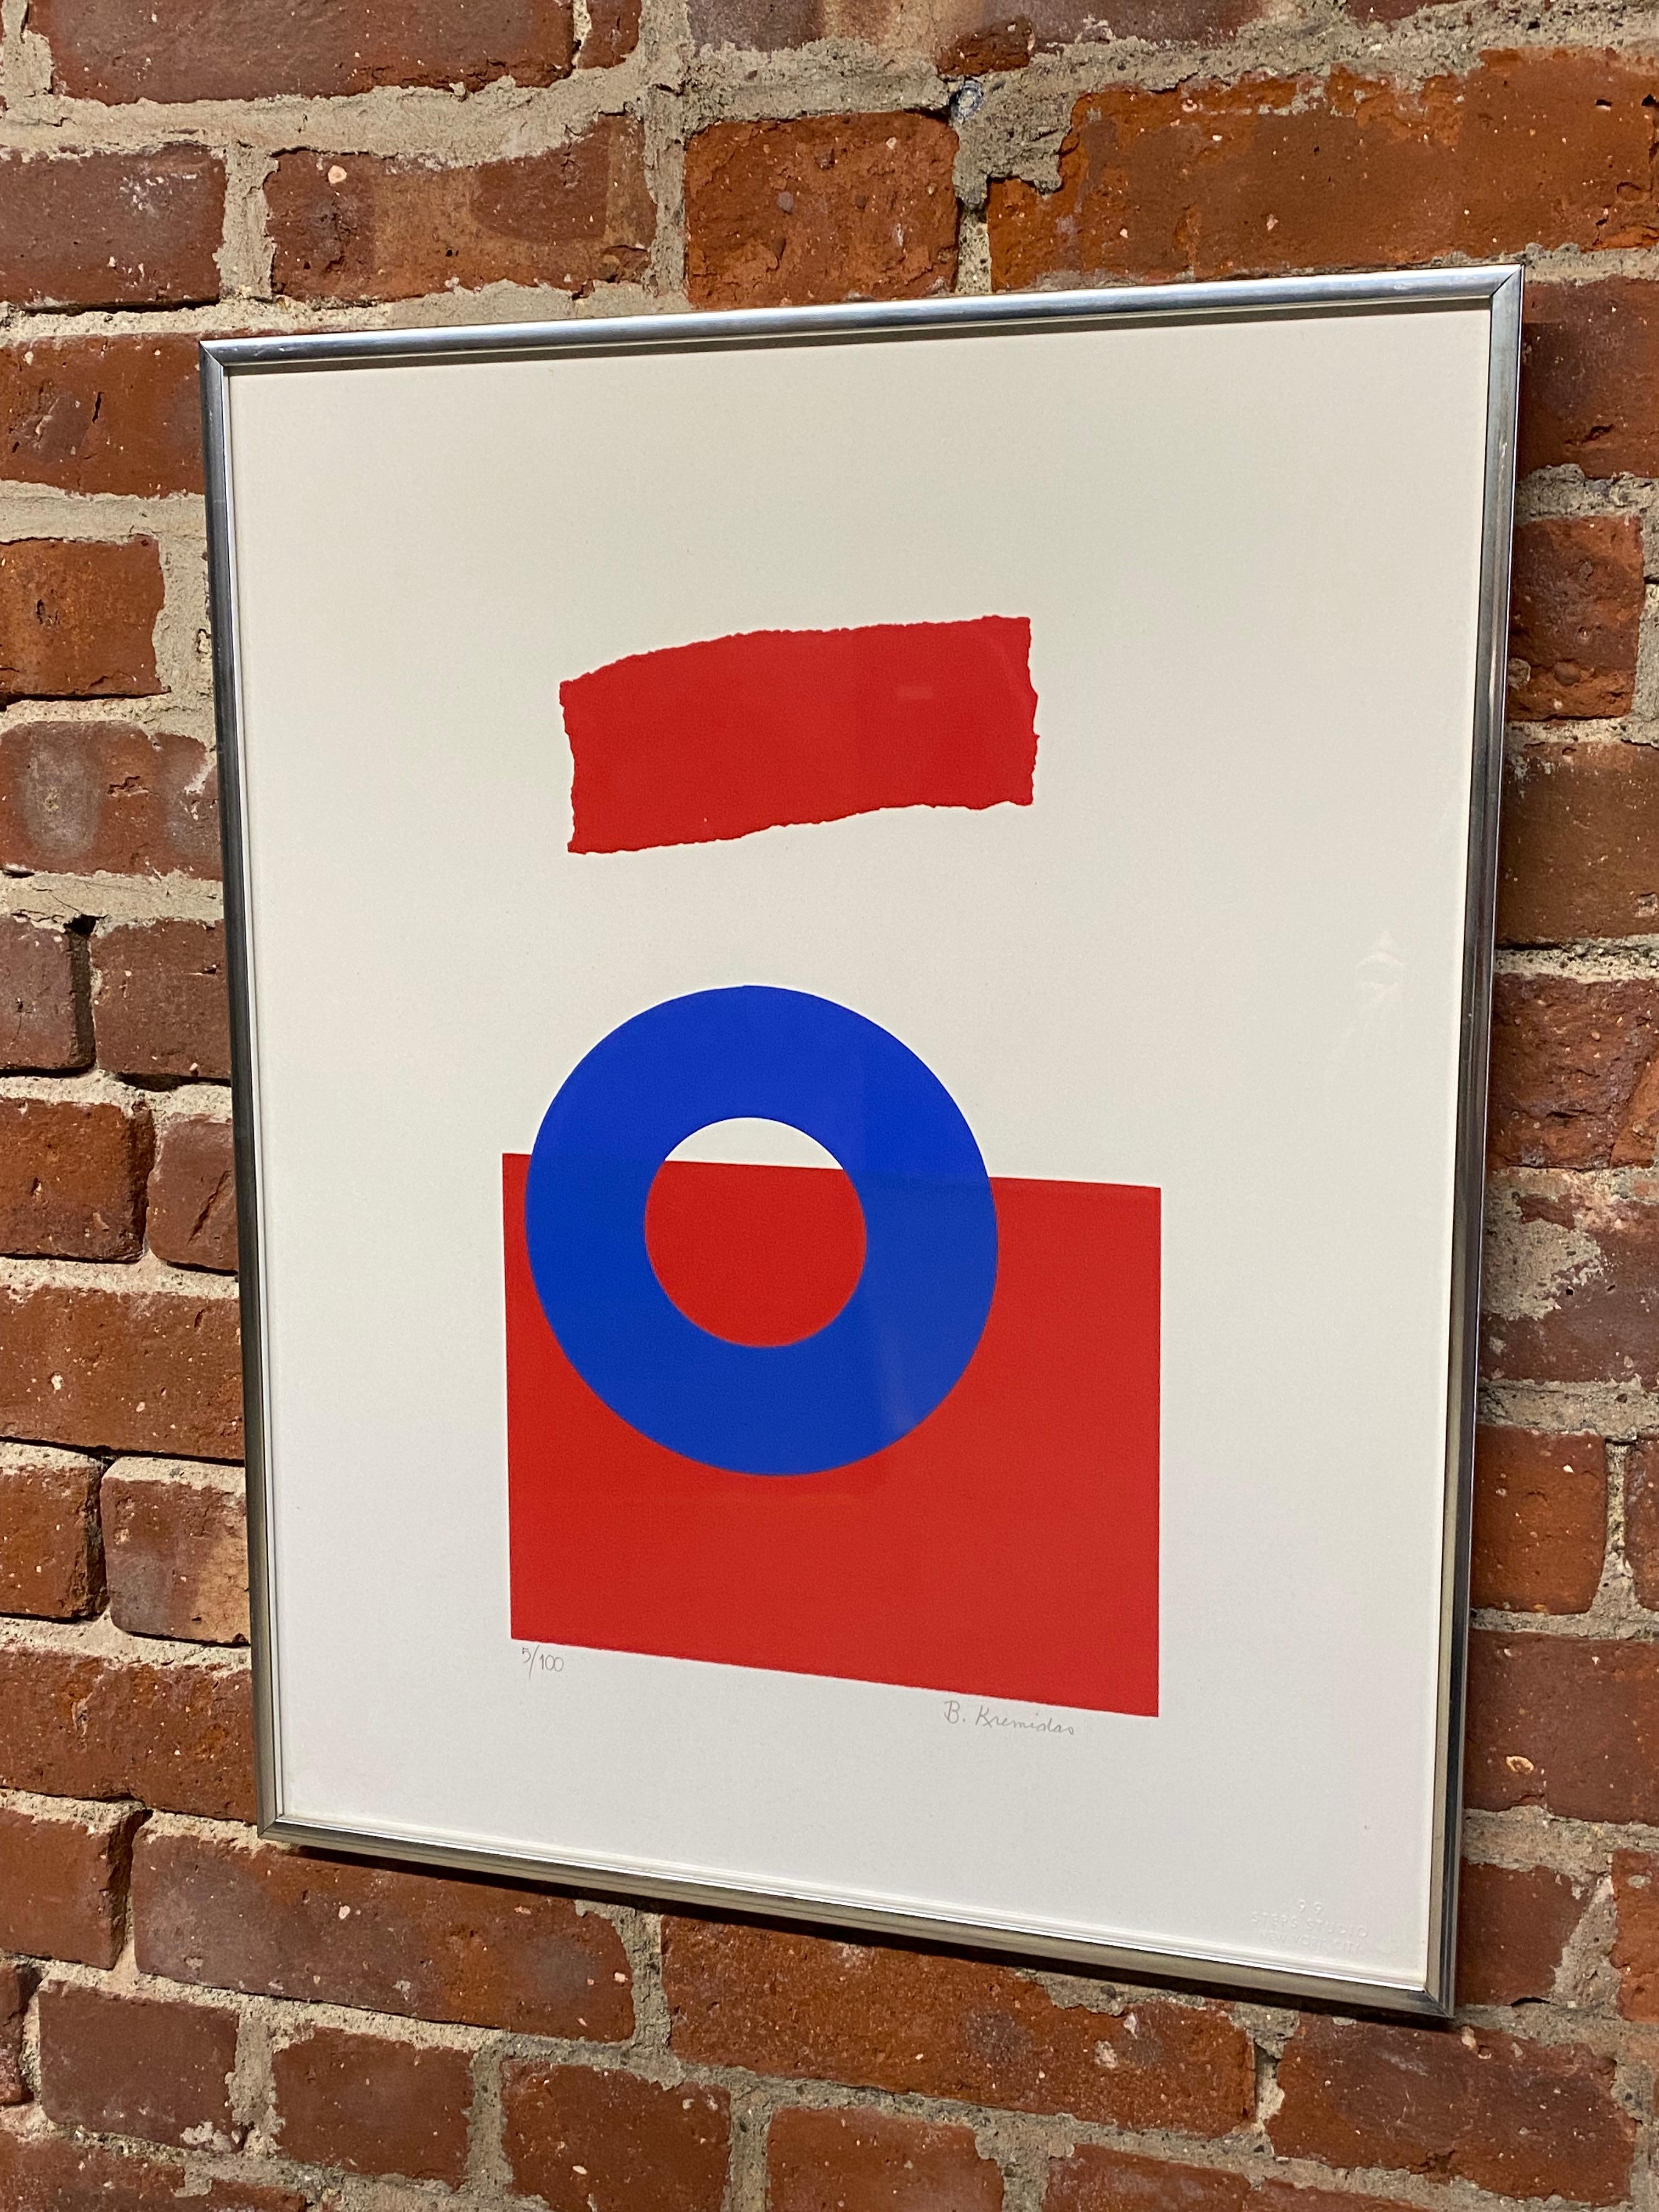 Hard edge shapes juxtaposed with the floating free edge shape in red, white and blue. This minimalist work is all about the negative and positive space and reminiscent of the more widely known works of Ellsworth Kelly. Circa 1970. Signed lower right